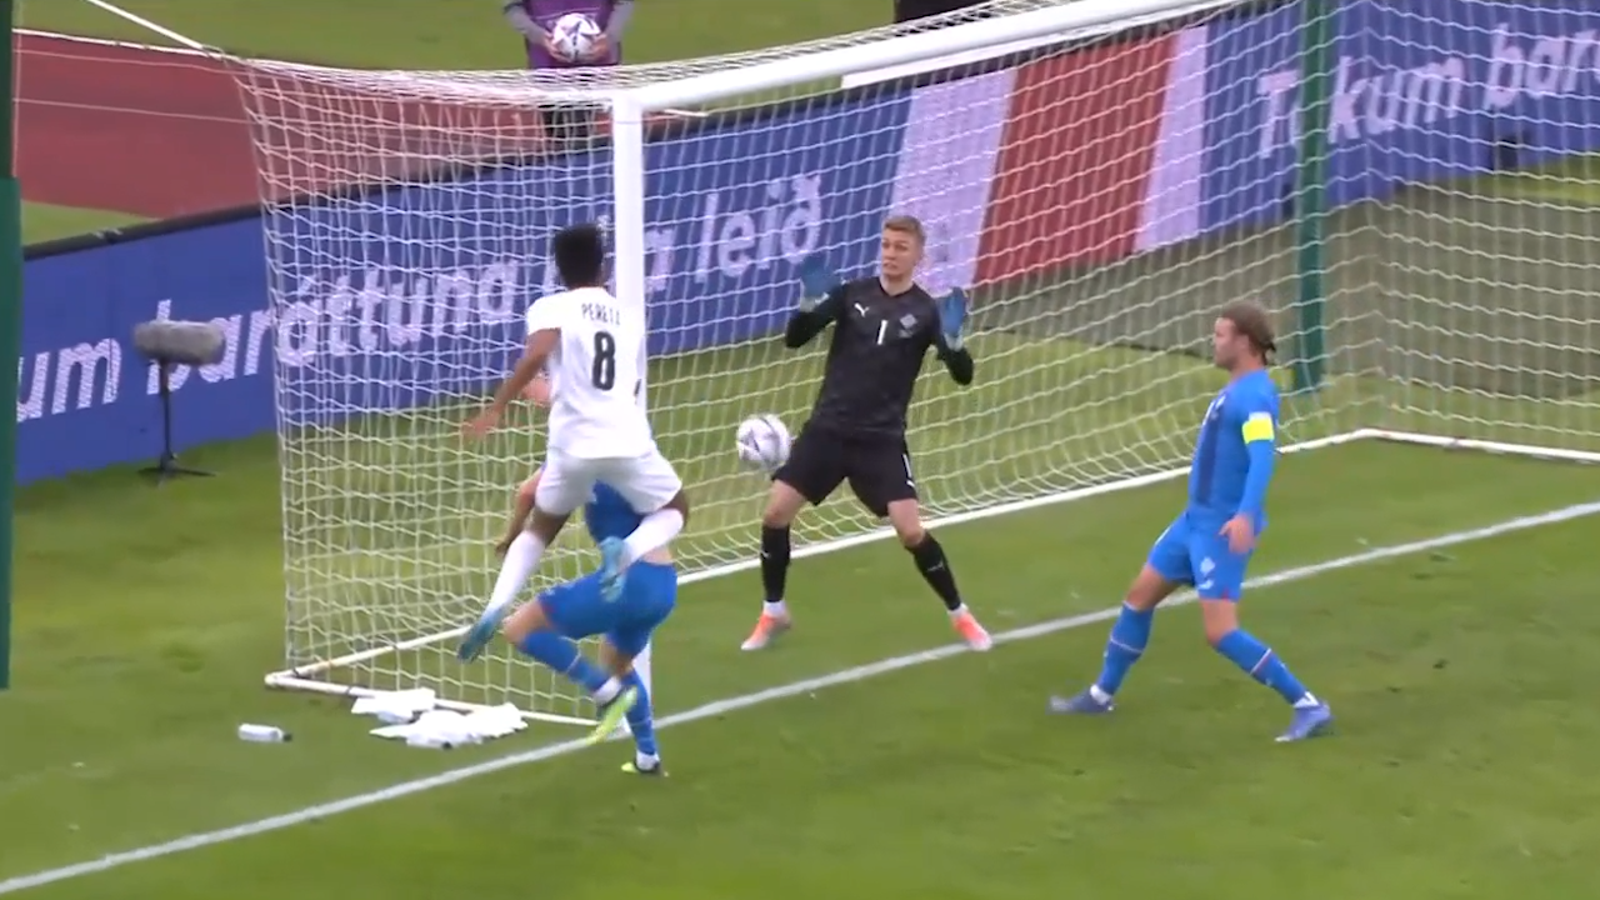 Israel's Dor Peretz levels the score at 2-2 against Iceland